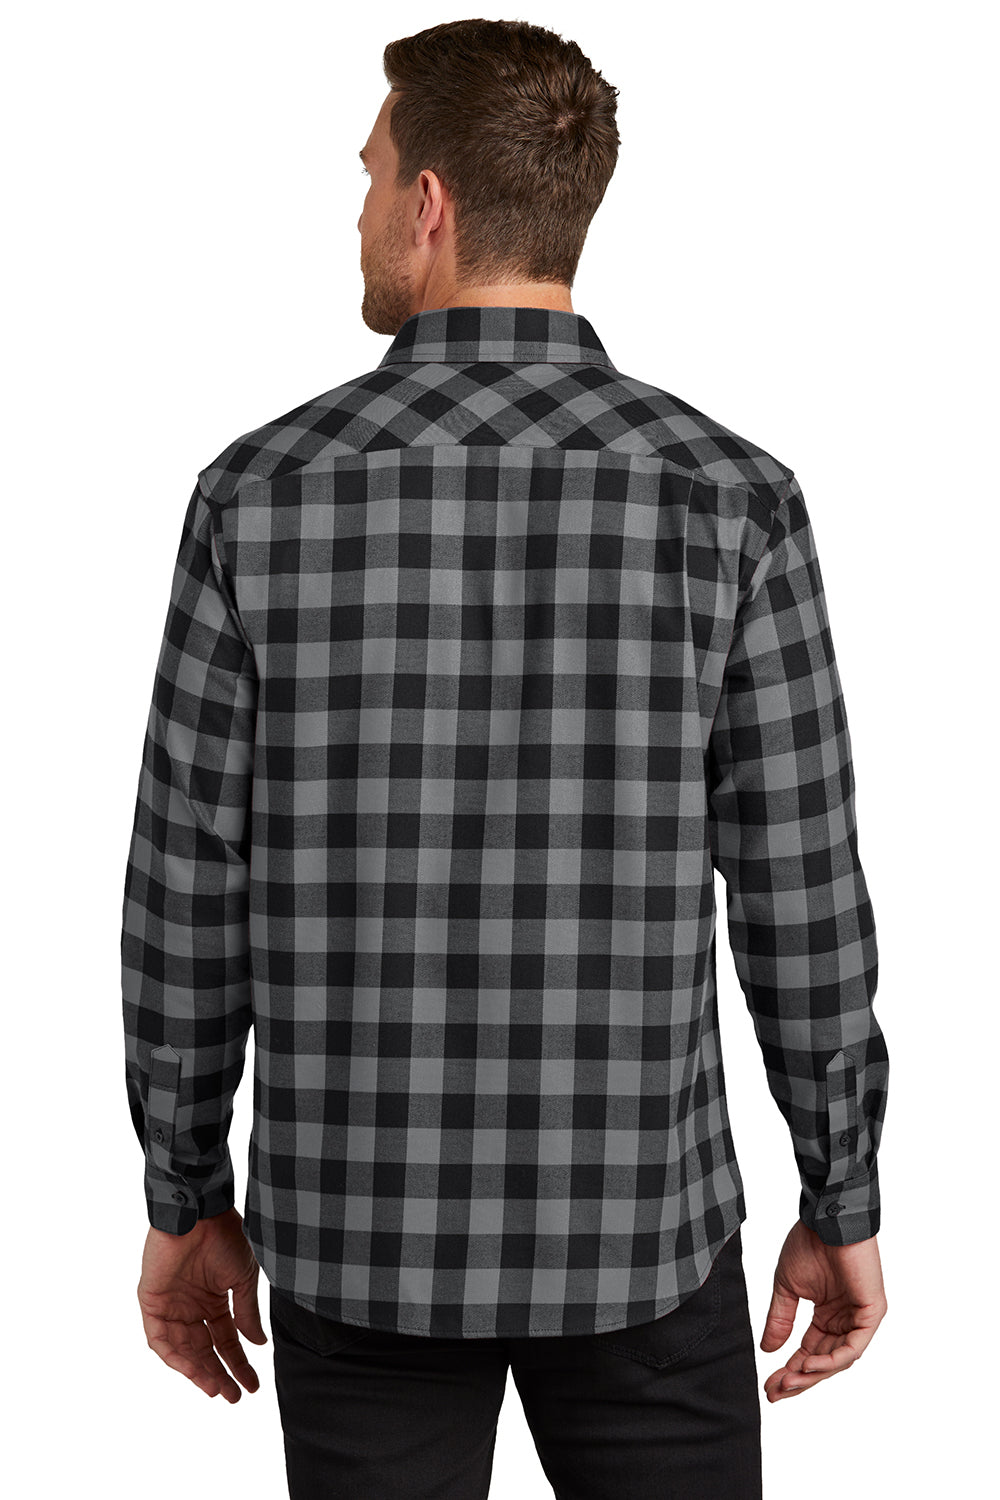 Port Authority W668 Mens Flannel Long Sleeve Button Down Shirt w/ Double Pockets Grey/Black Buffalo Back